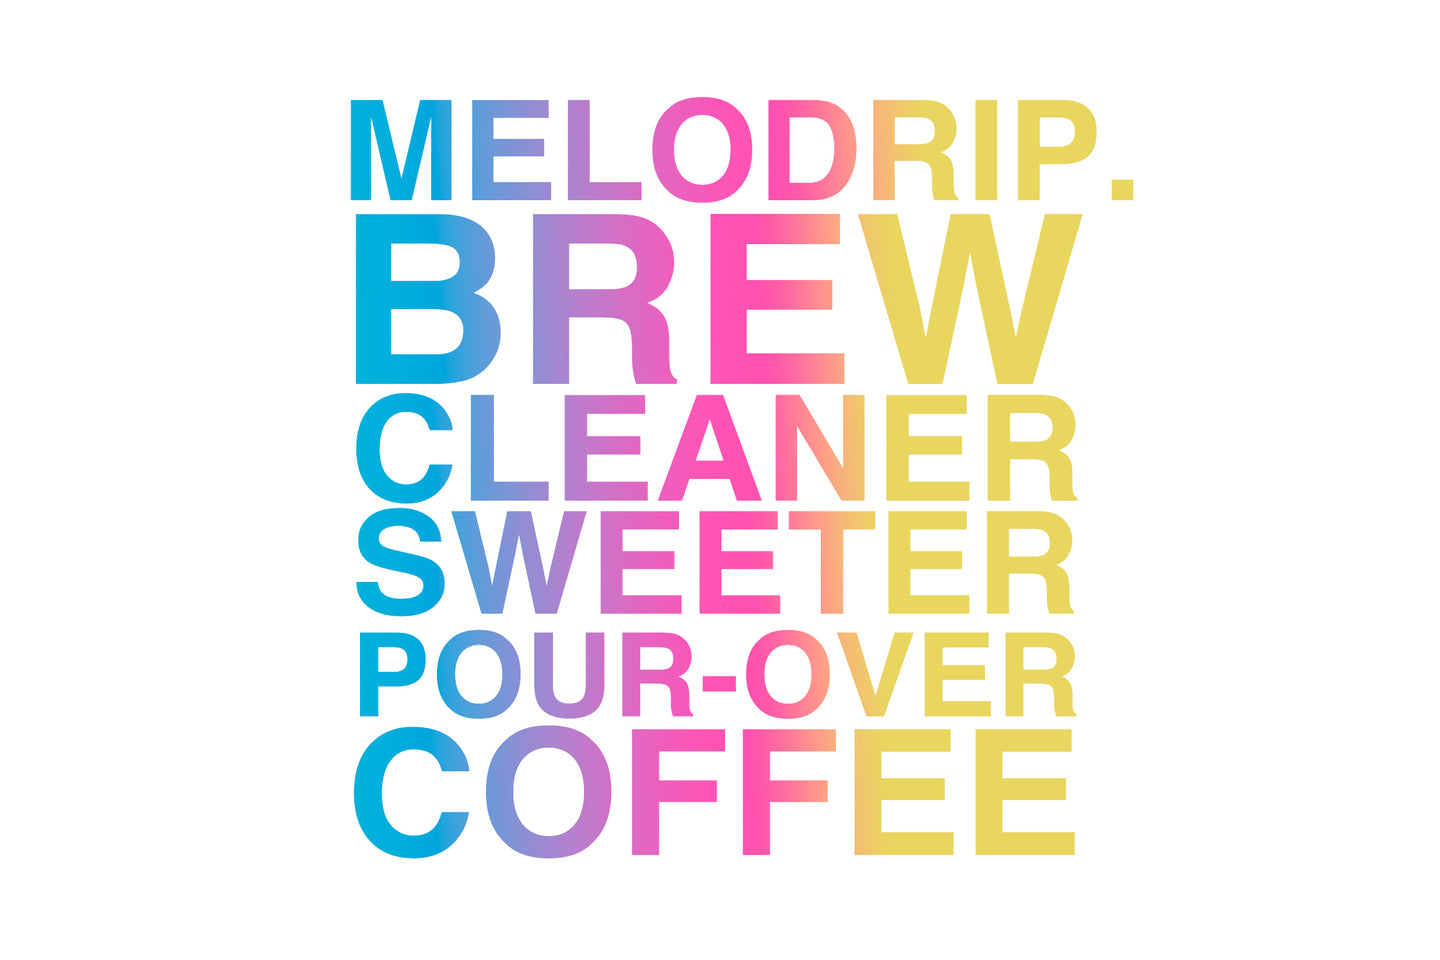 The Melodrip Tool Can Improve Your Pour-Over Coffee - Eater